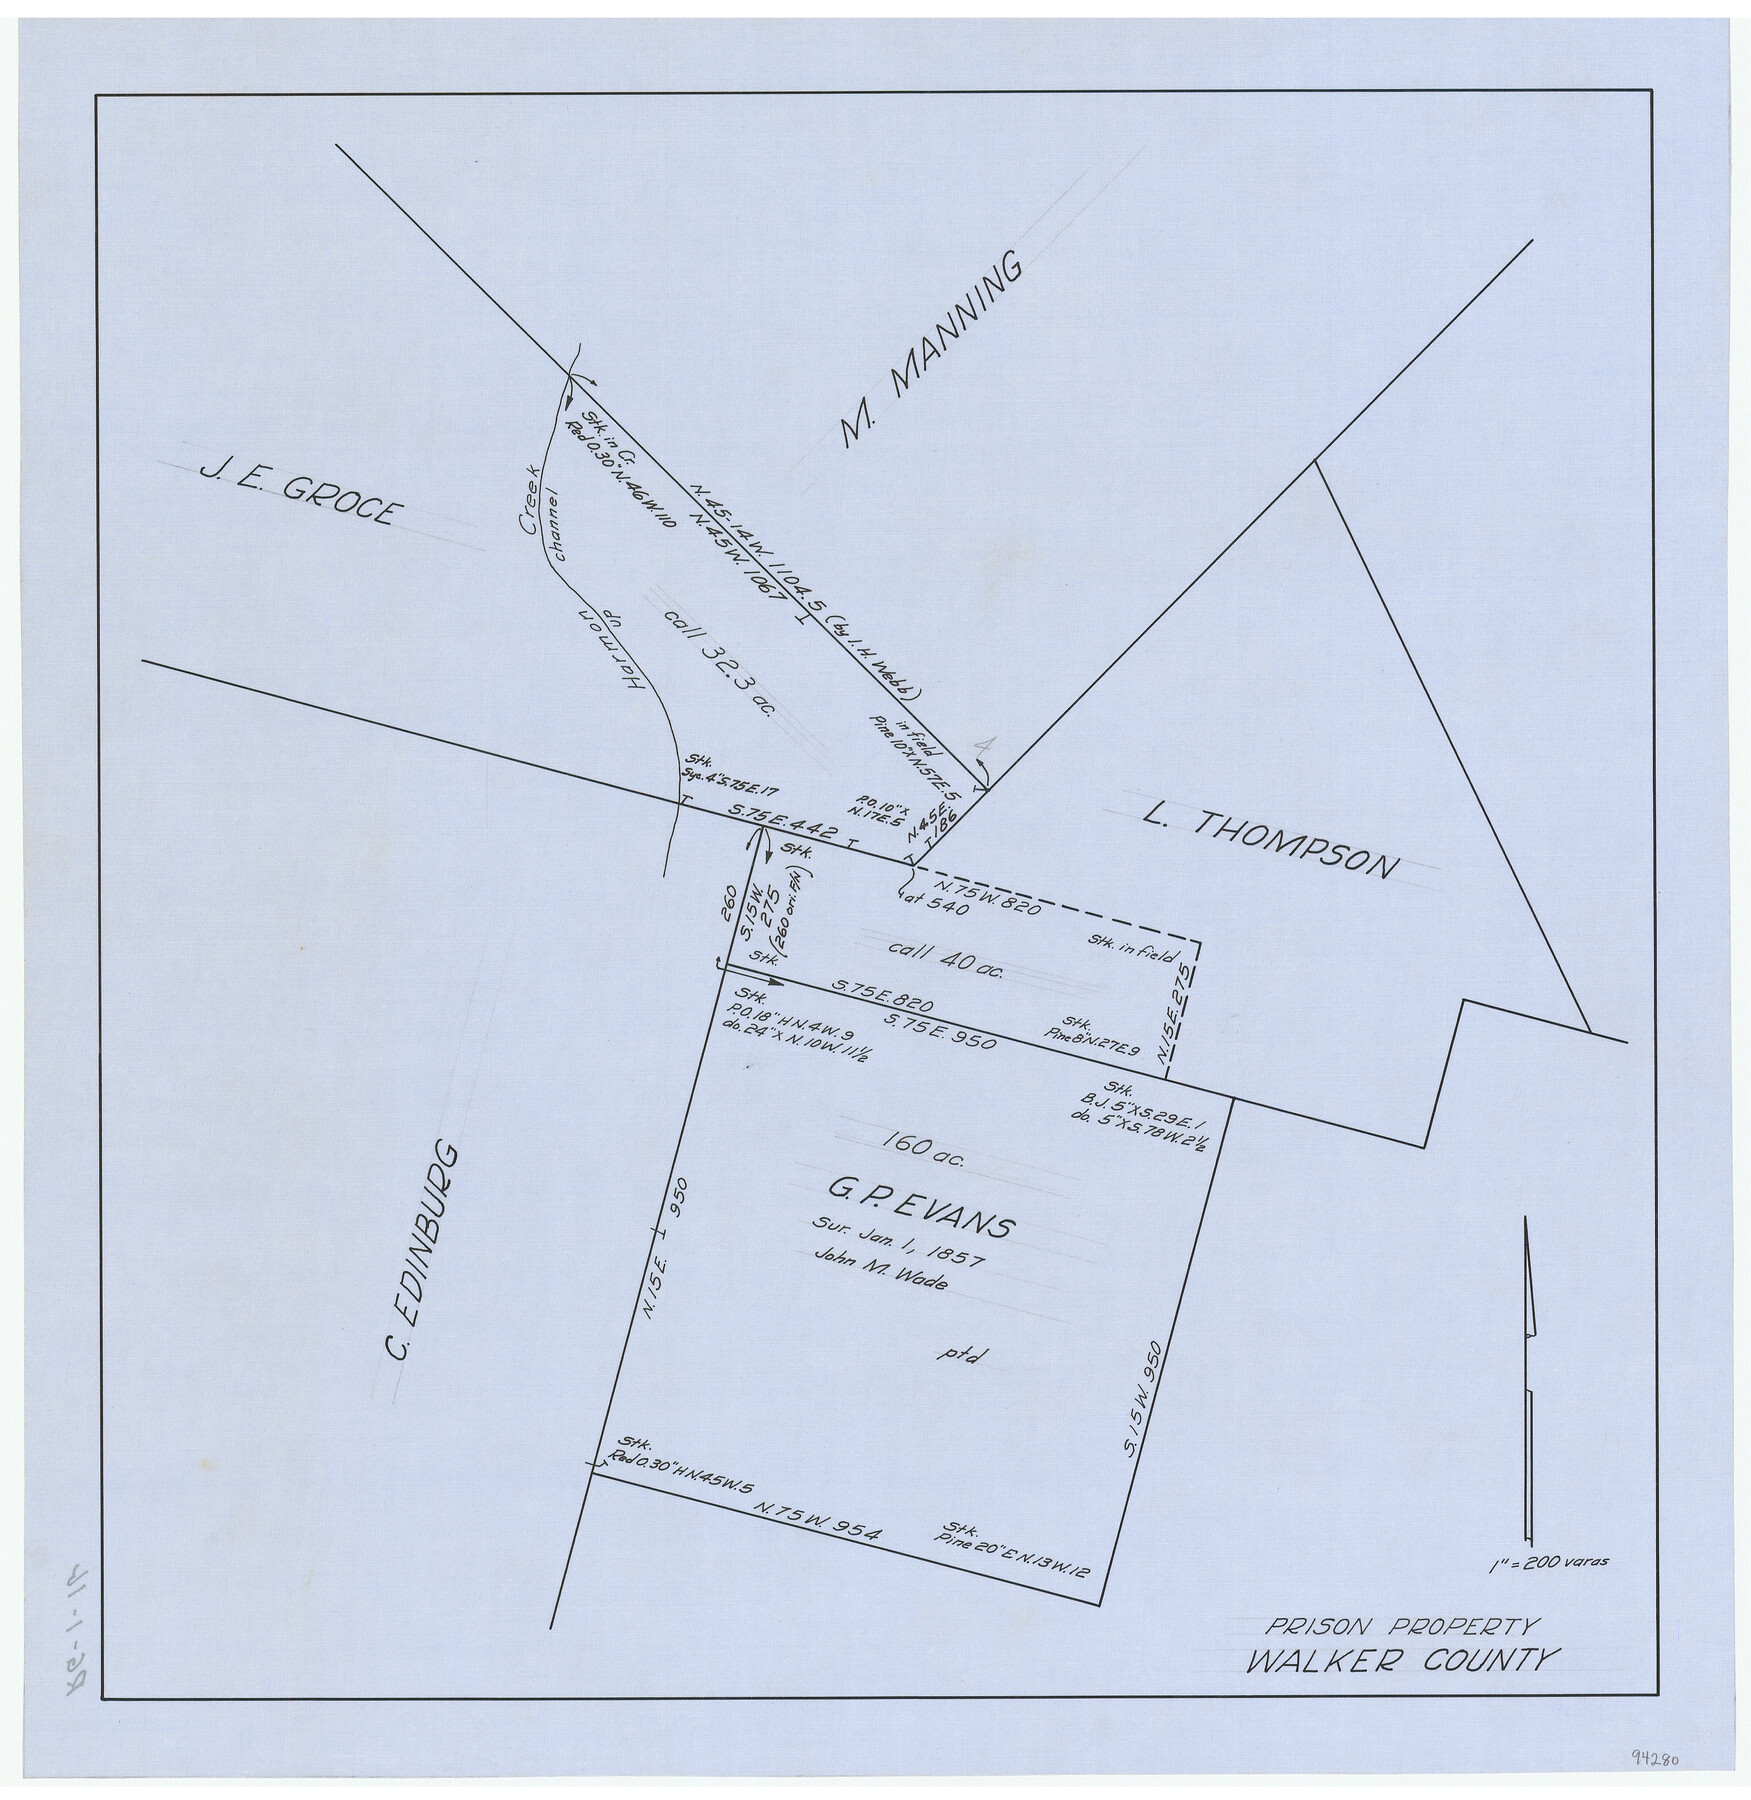 94280, Prison Property, Walker County, General Map Collection